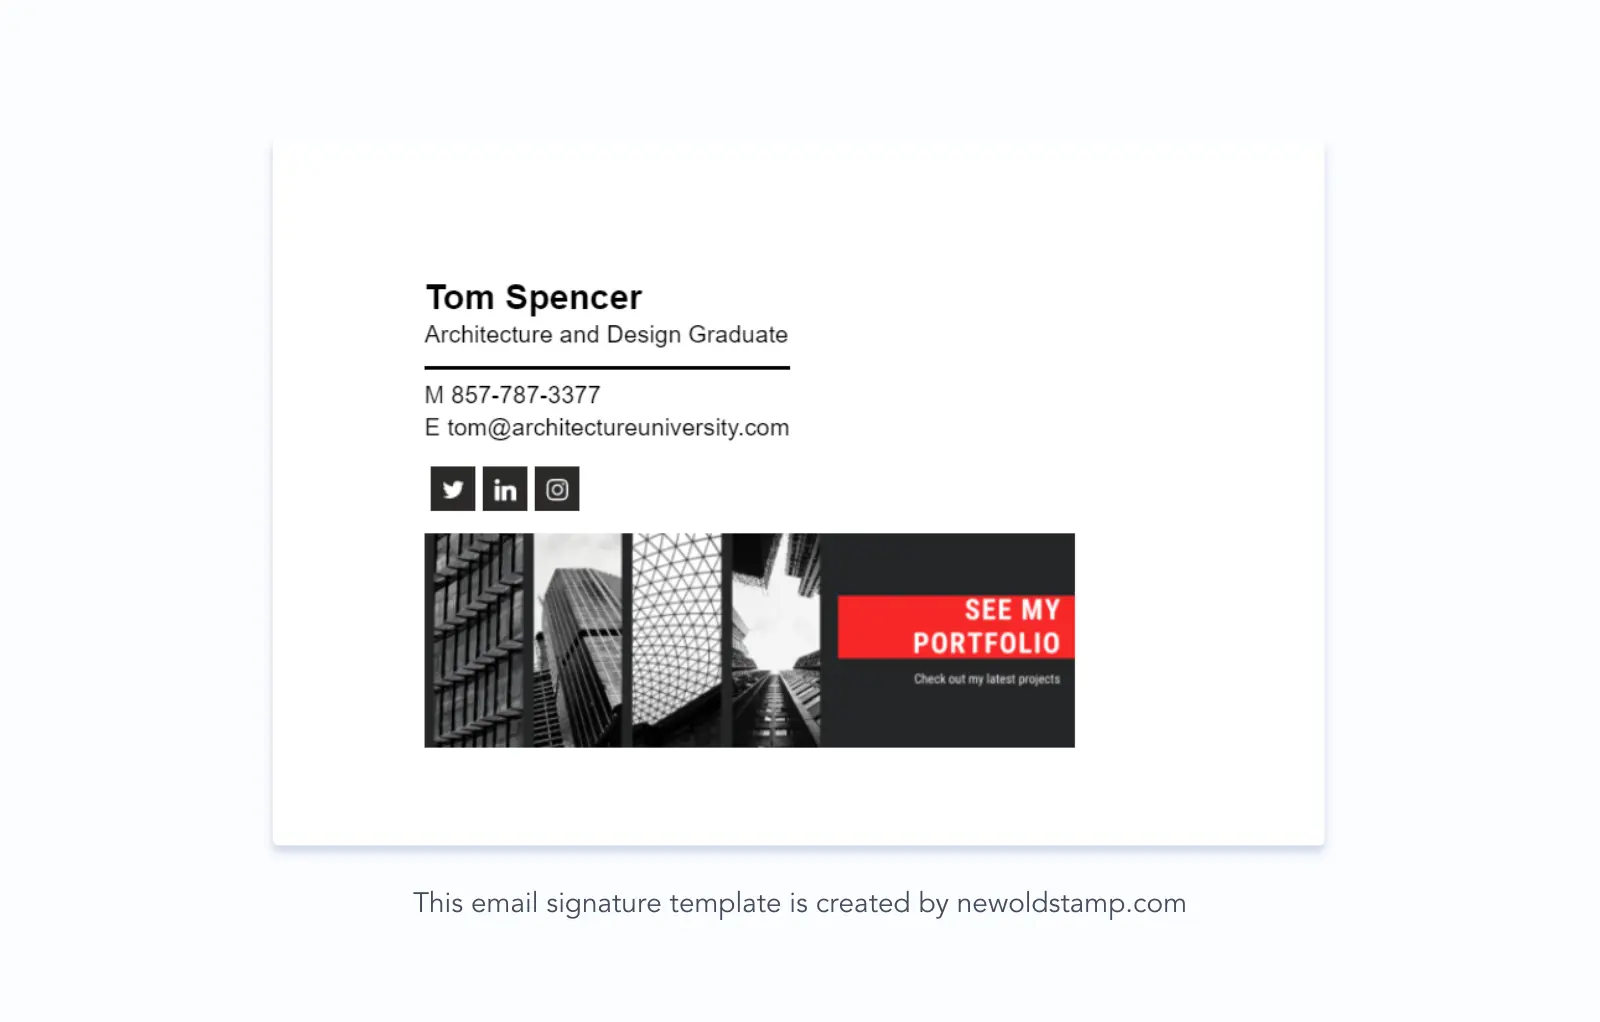 Example 8. Graduate email signature with a link to portfolio